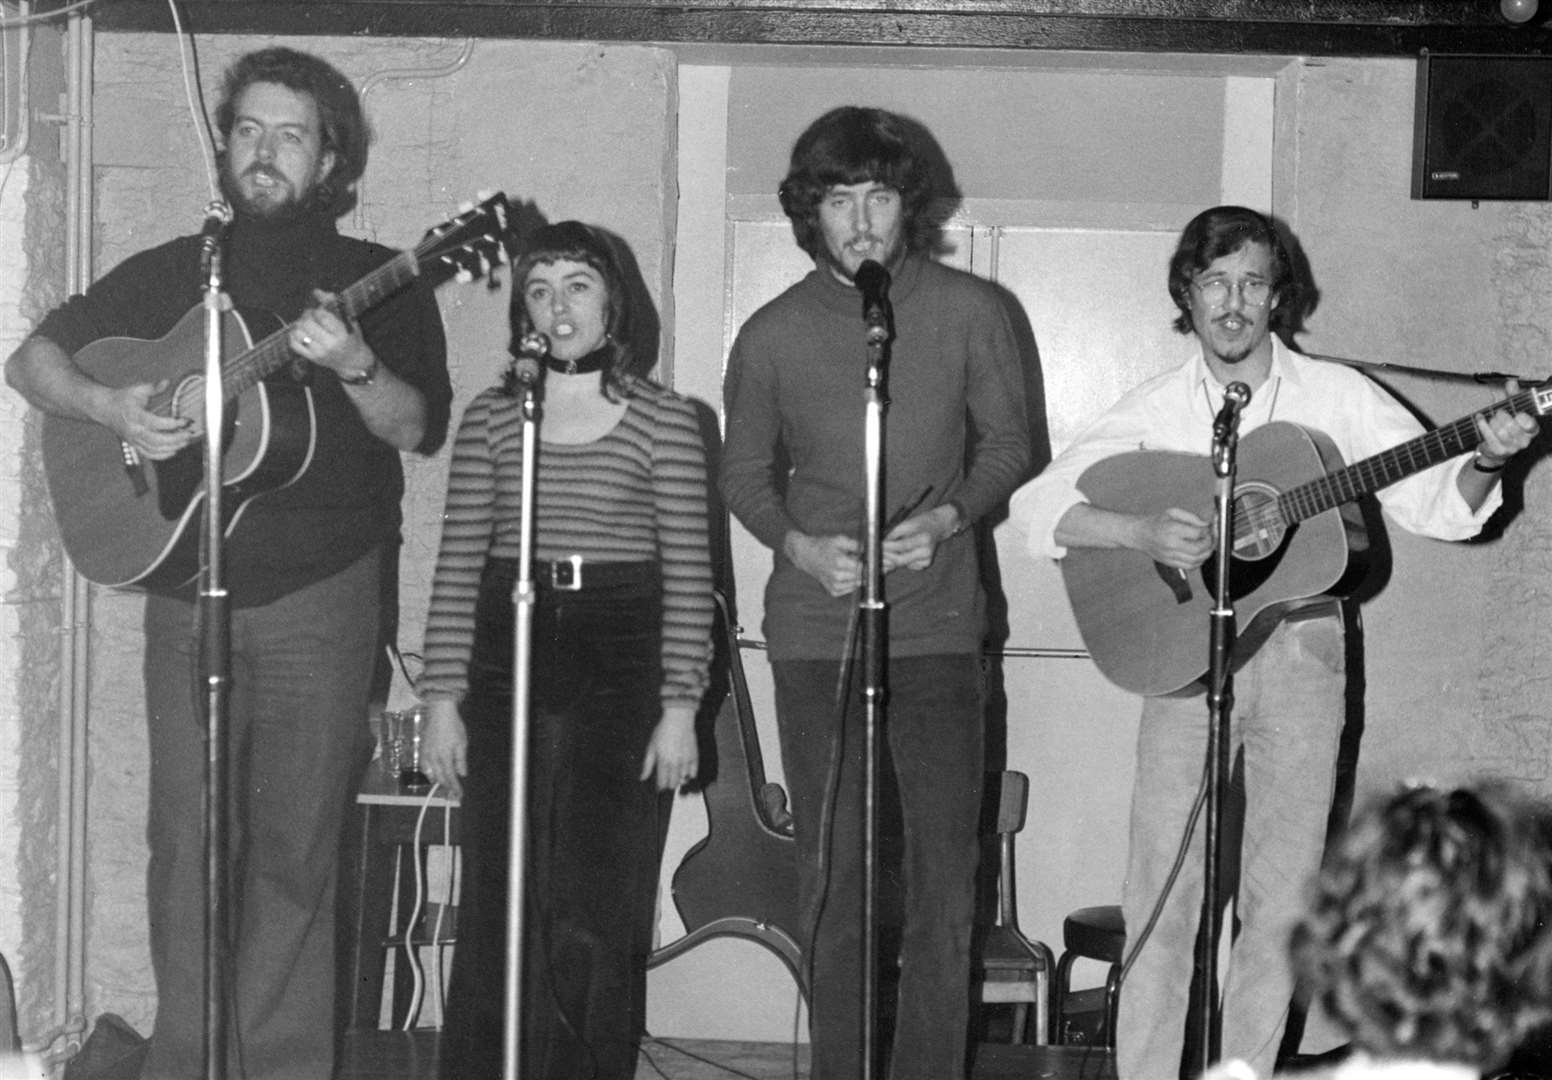 Mirk playing in the Barn at the Viewfirth folk festival in 1979. They are from left: Ian Sinclair, Margie Sinclair, Kevin Maclean and Ray Crompton. Pic: Jack Selby Collection / Thurso Heritage Society